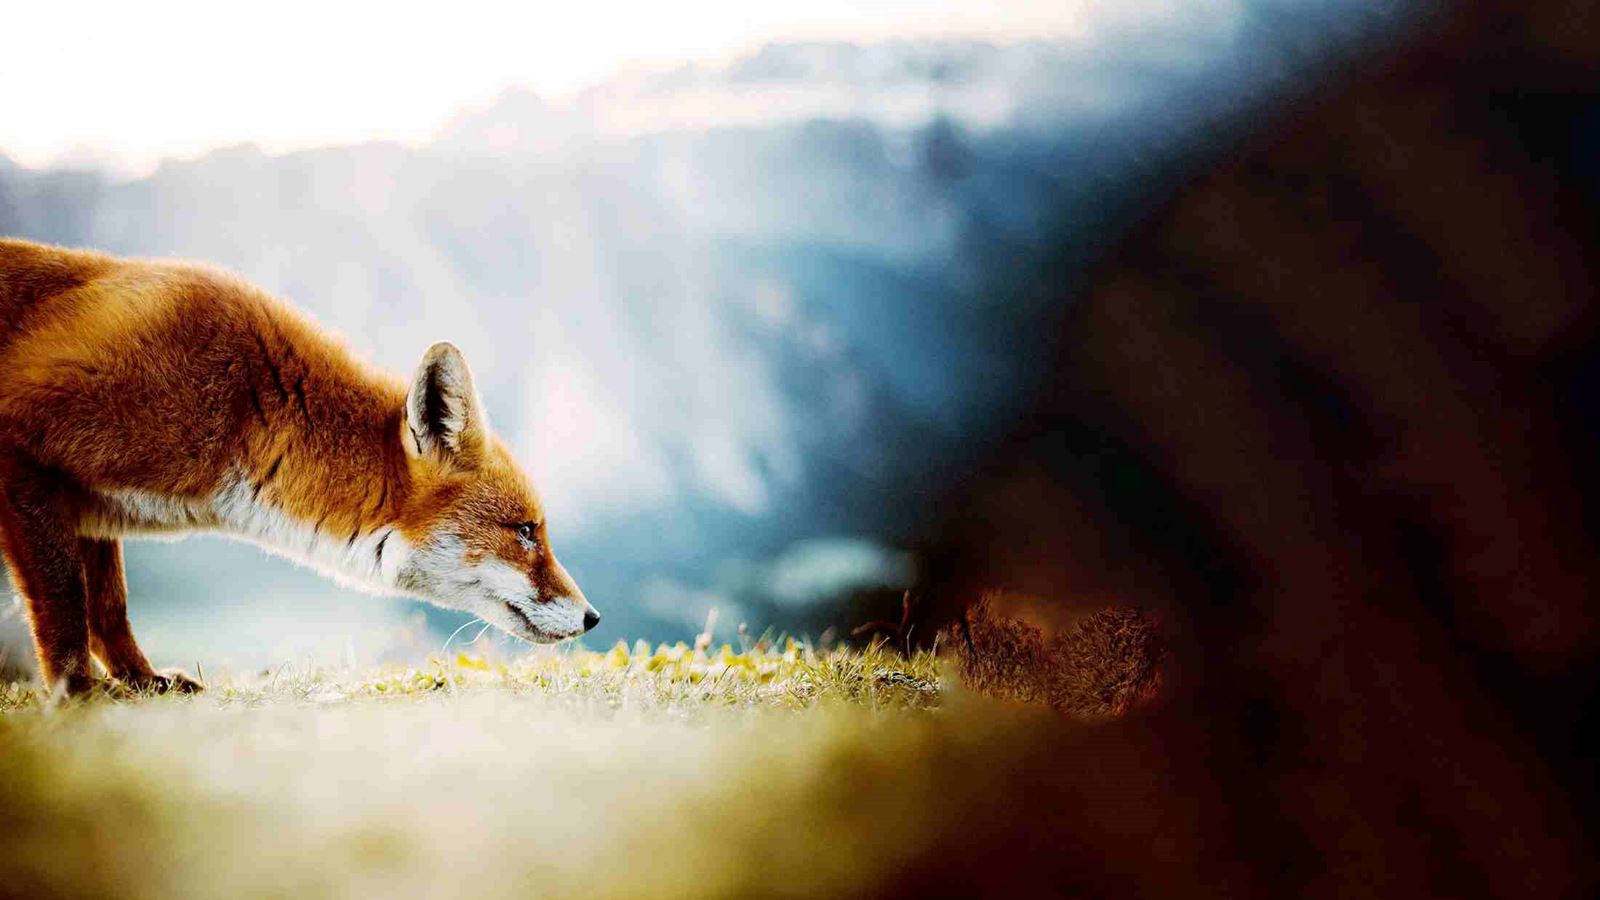 Fox in the wild from the climate school image bank